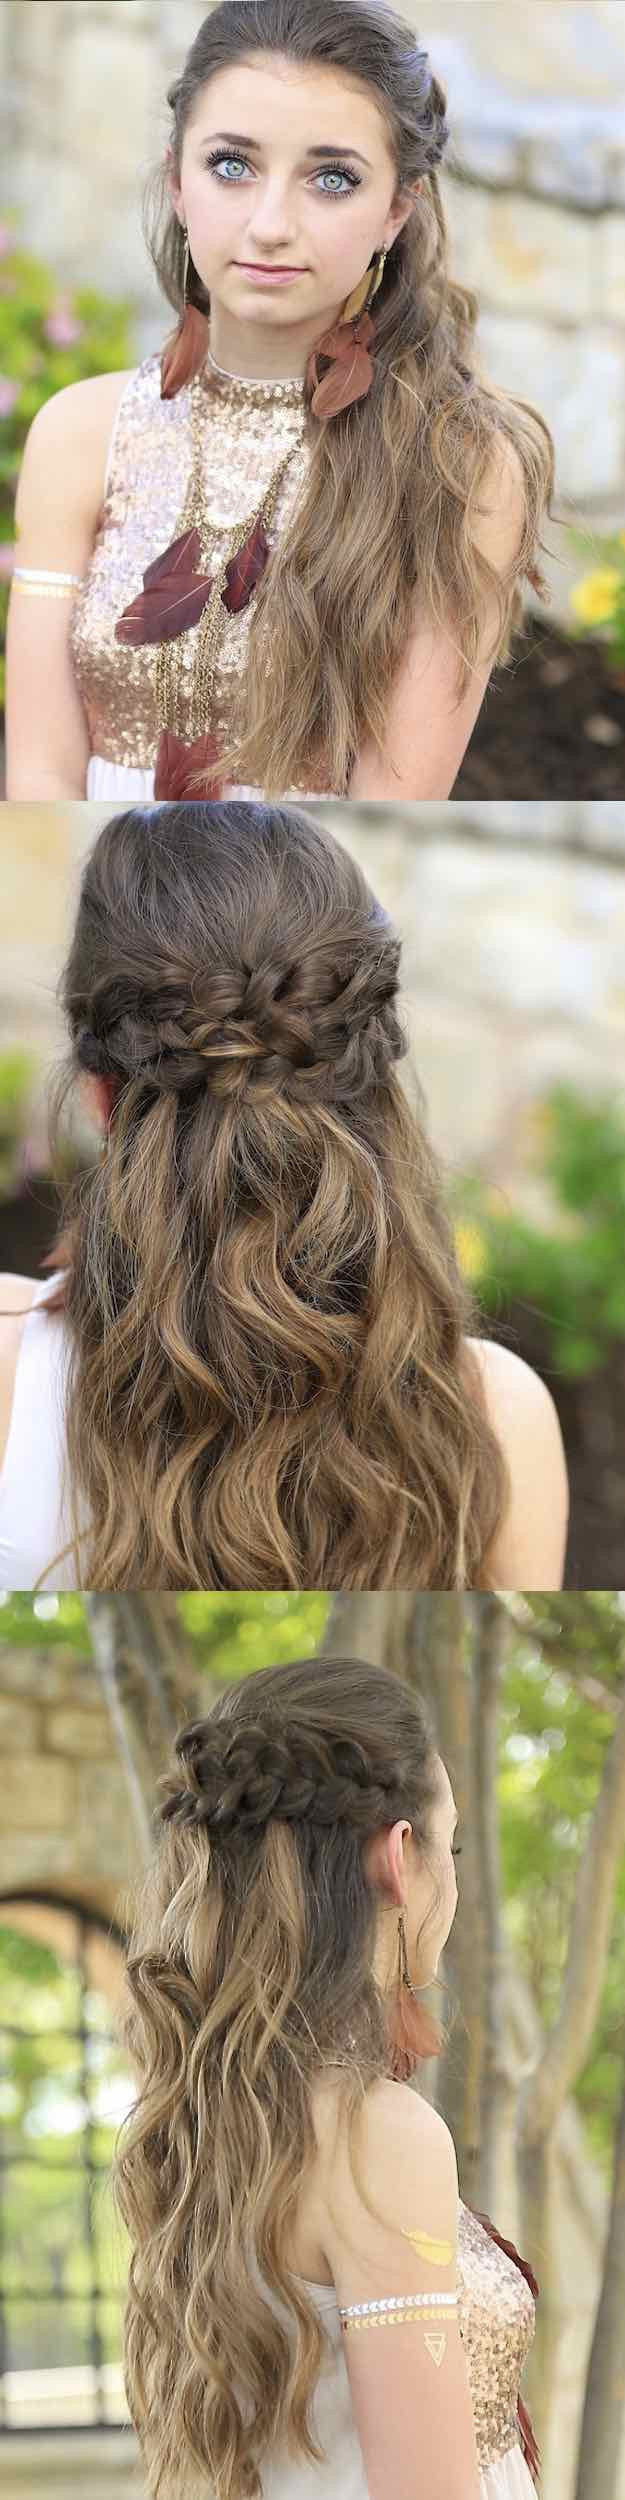 Half Up Half Down Prom Hairstyles
 25 Easy Half Up Half Down Hairstyle Tutorials For Prom